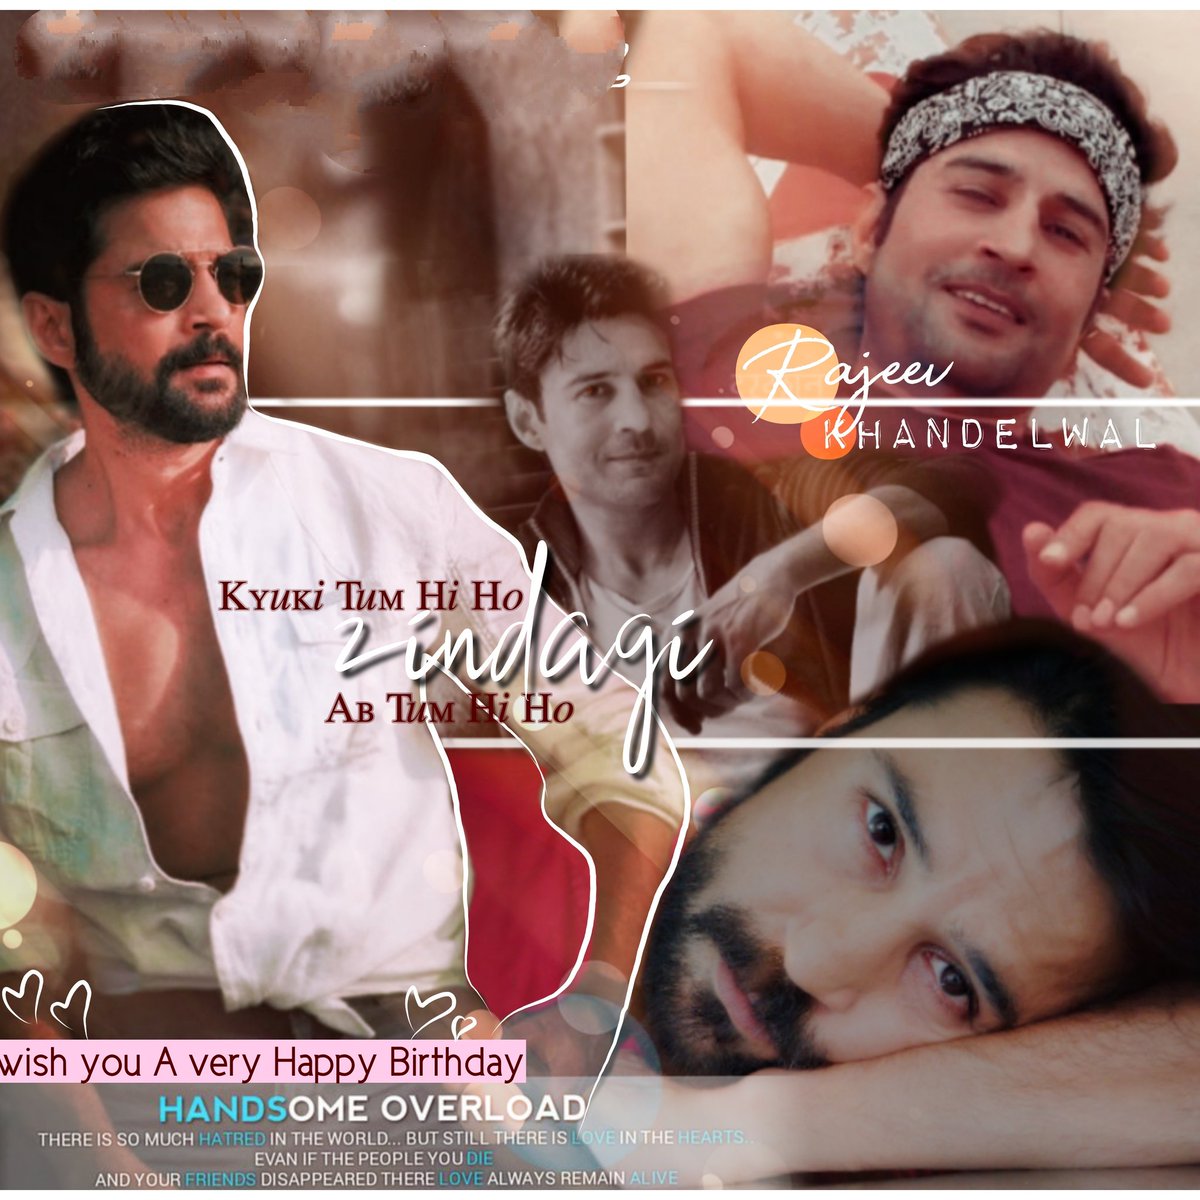 Day by Day as your birthday is arriving the excitement level is getting much much higher ✮ | 𝗥𝗮𝗷𝗲𝗲𝘃 𝗞𝗵𝗮𝗻𝗱𝗲𝗹𝘄𝗮𝗹 | ✮ #HBDRajeevKhandelwal #HappyBirthdayRajeevKhandelwal #WeloveRajeevKhandelwal #RajeevKhandelwal #6DaysToGo